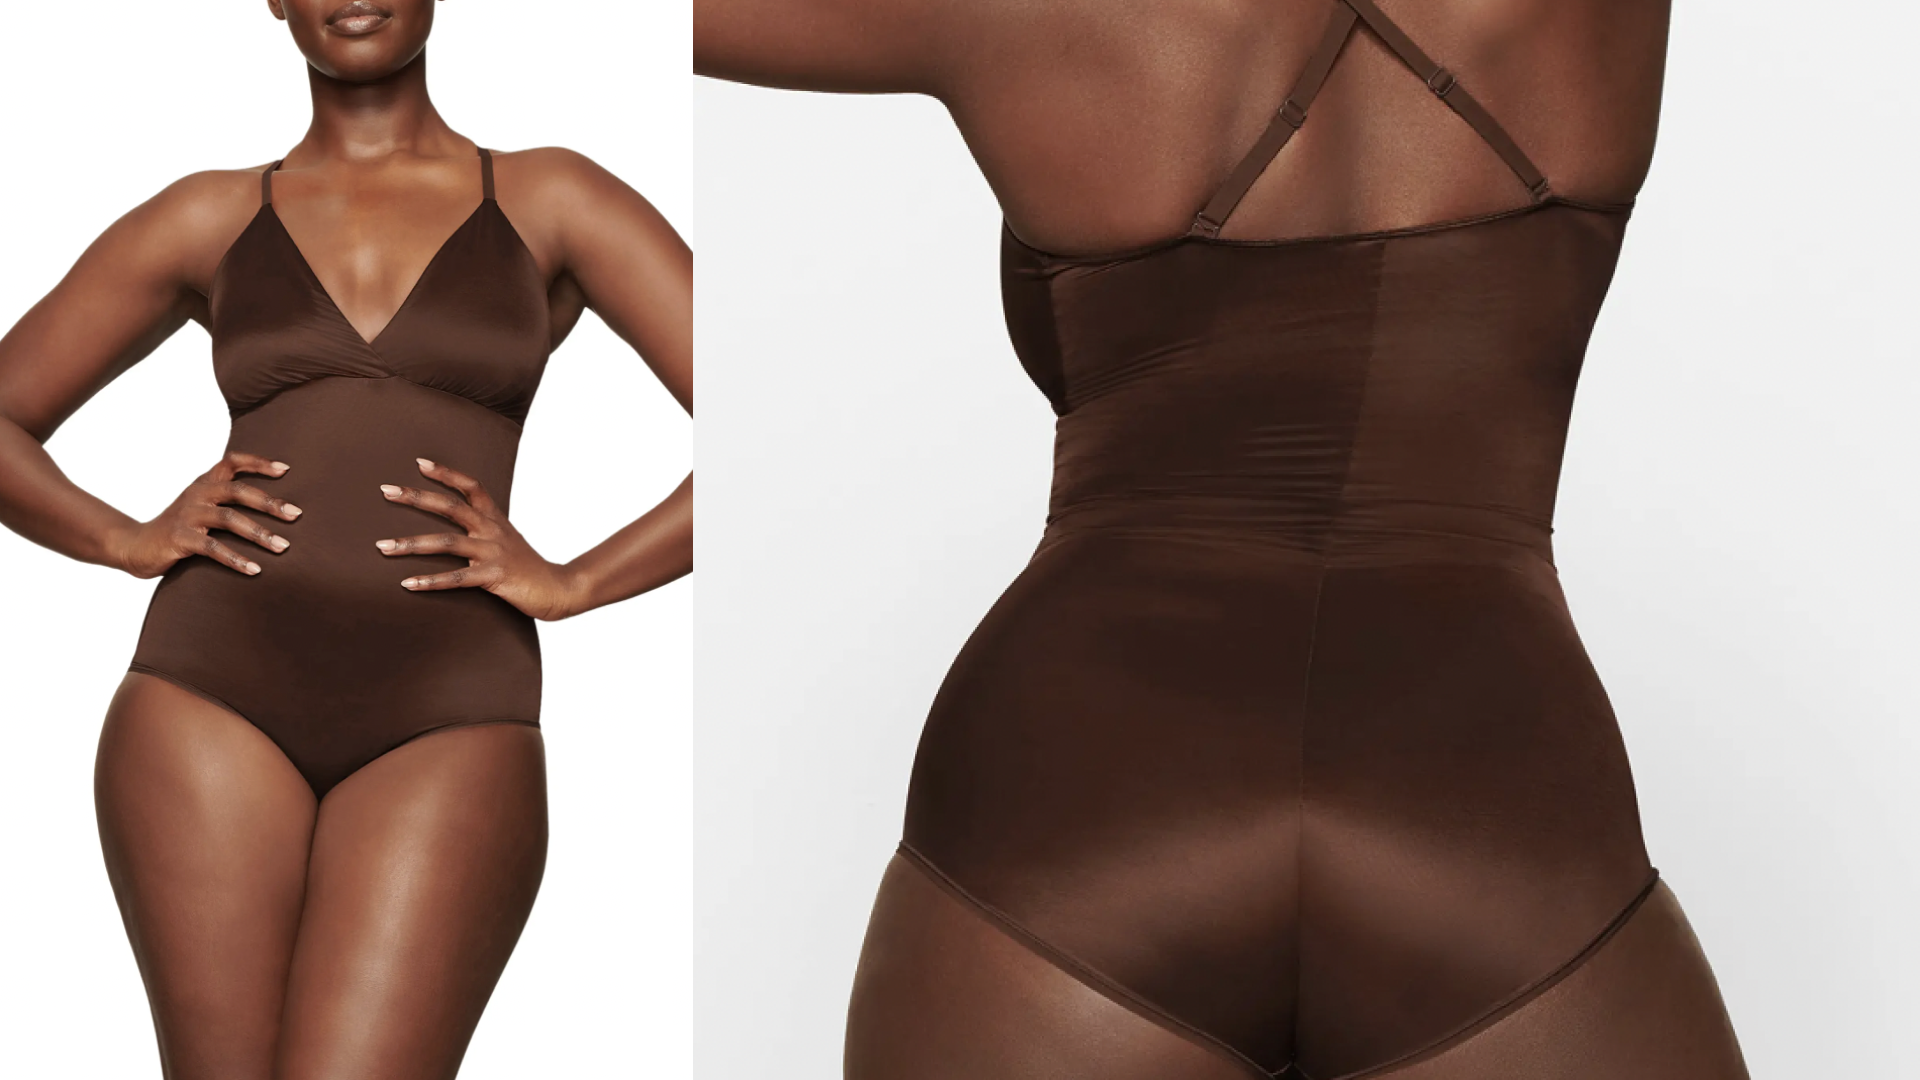 Sick of shapewear? Time to slip into the Comfort Smoothing